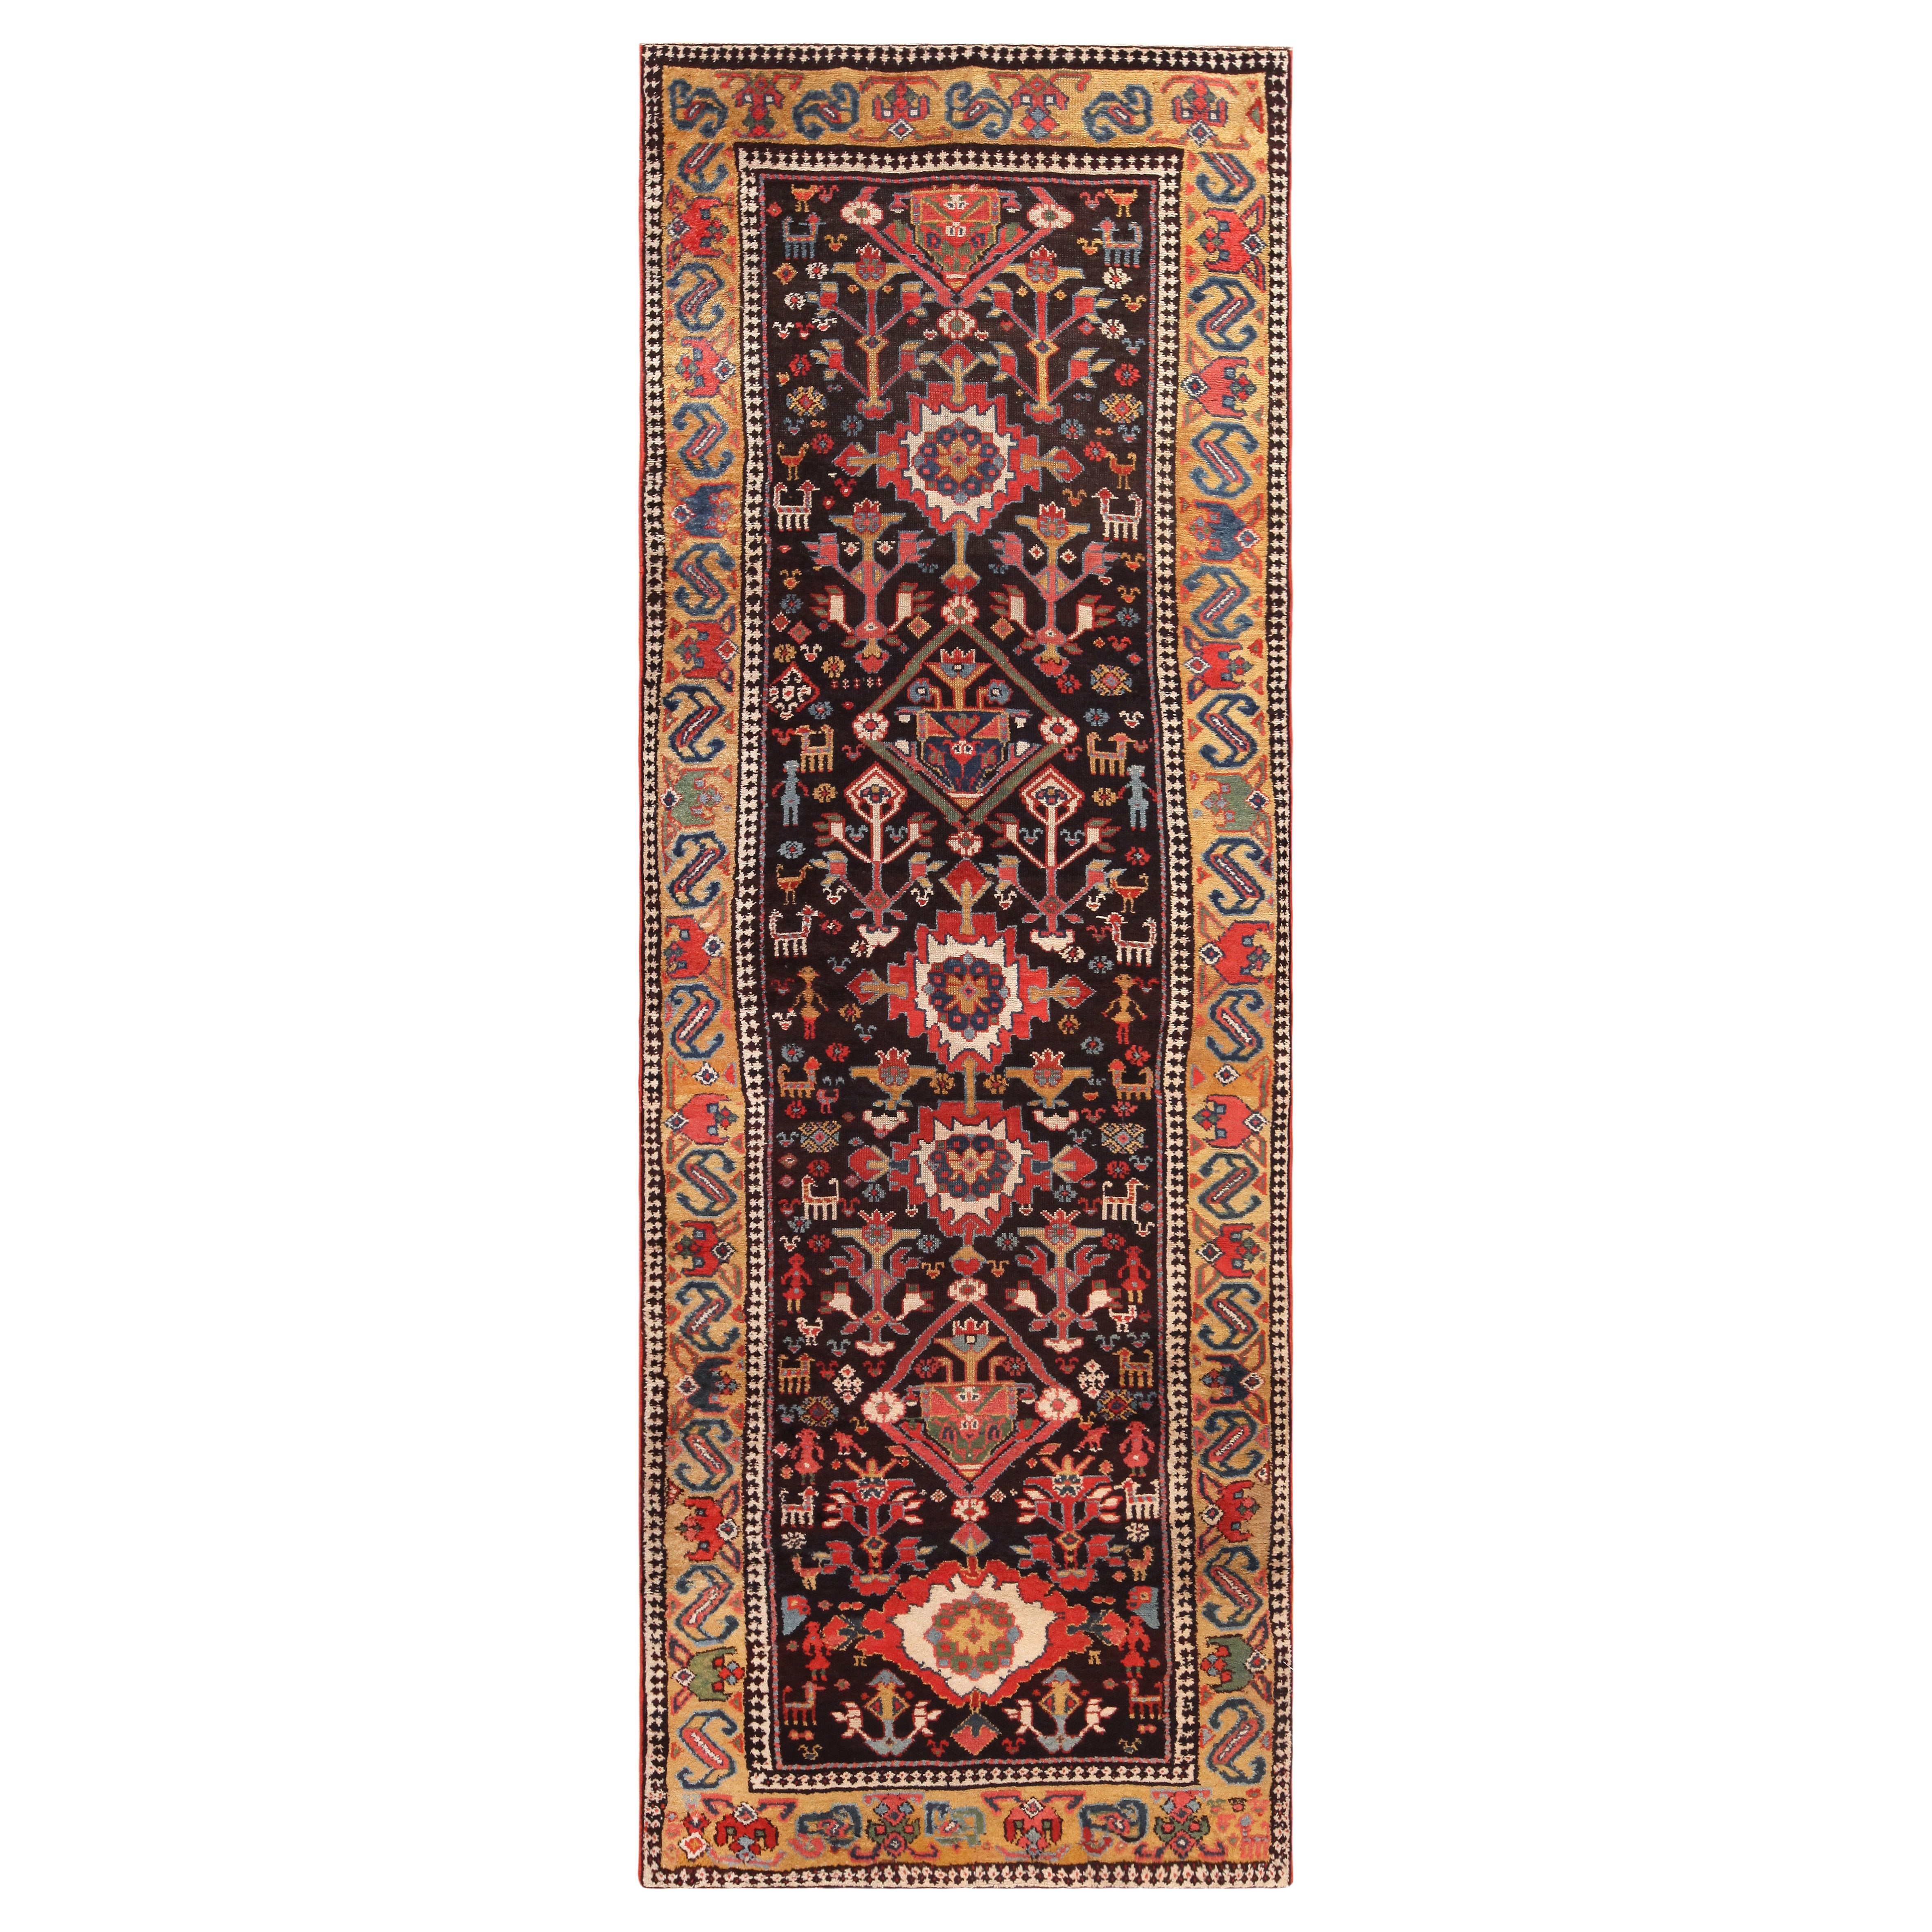 Antique North West Persian Runner. 3 ft 6 in x 9 ft 8 in